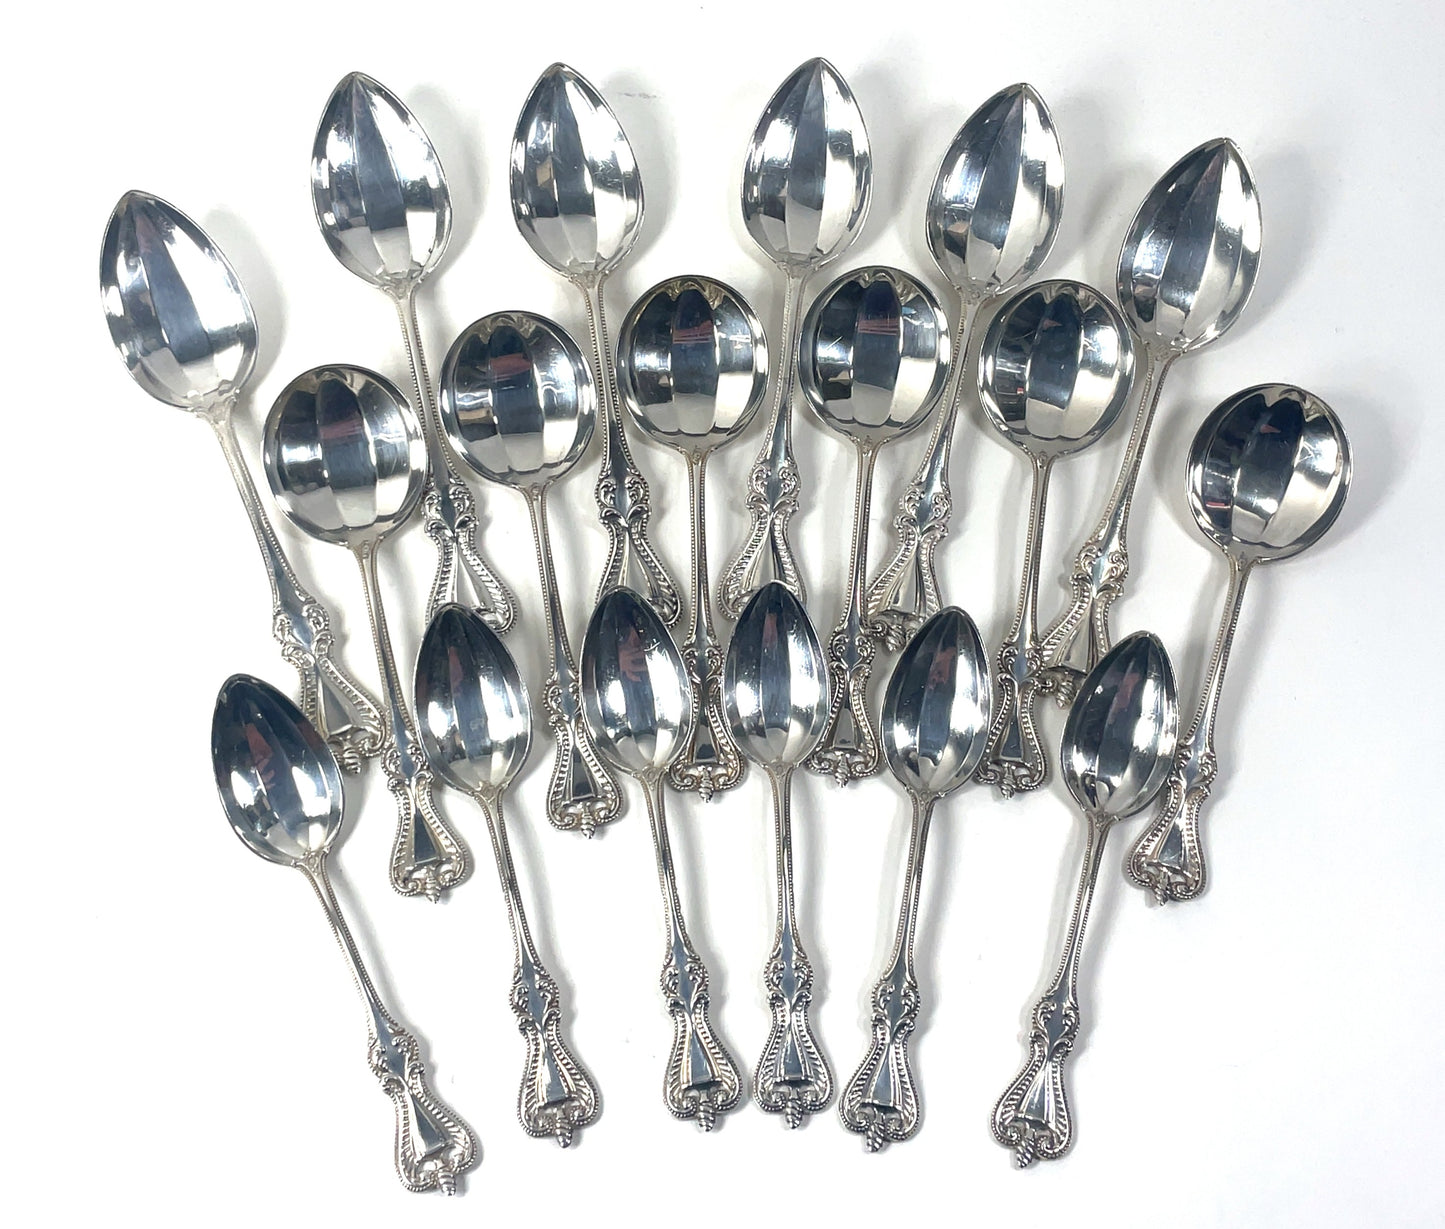 Antique 49 Pieces Old Colonial By Towle Service for 6 with Serving Pieces No Mono Sterling Silver